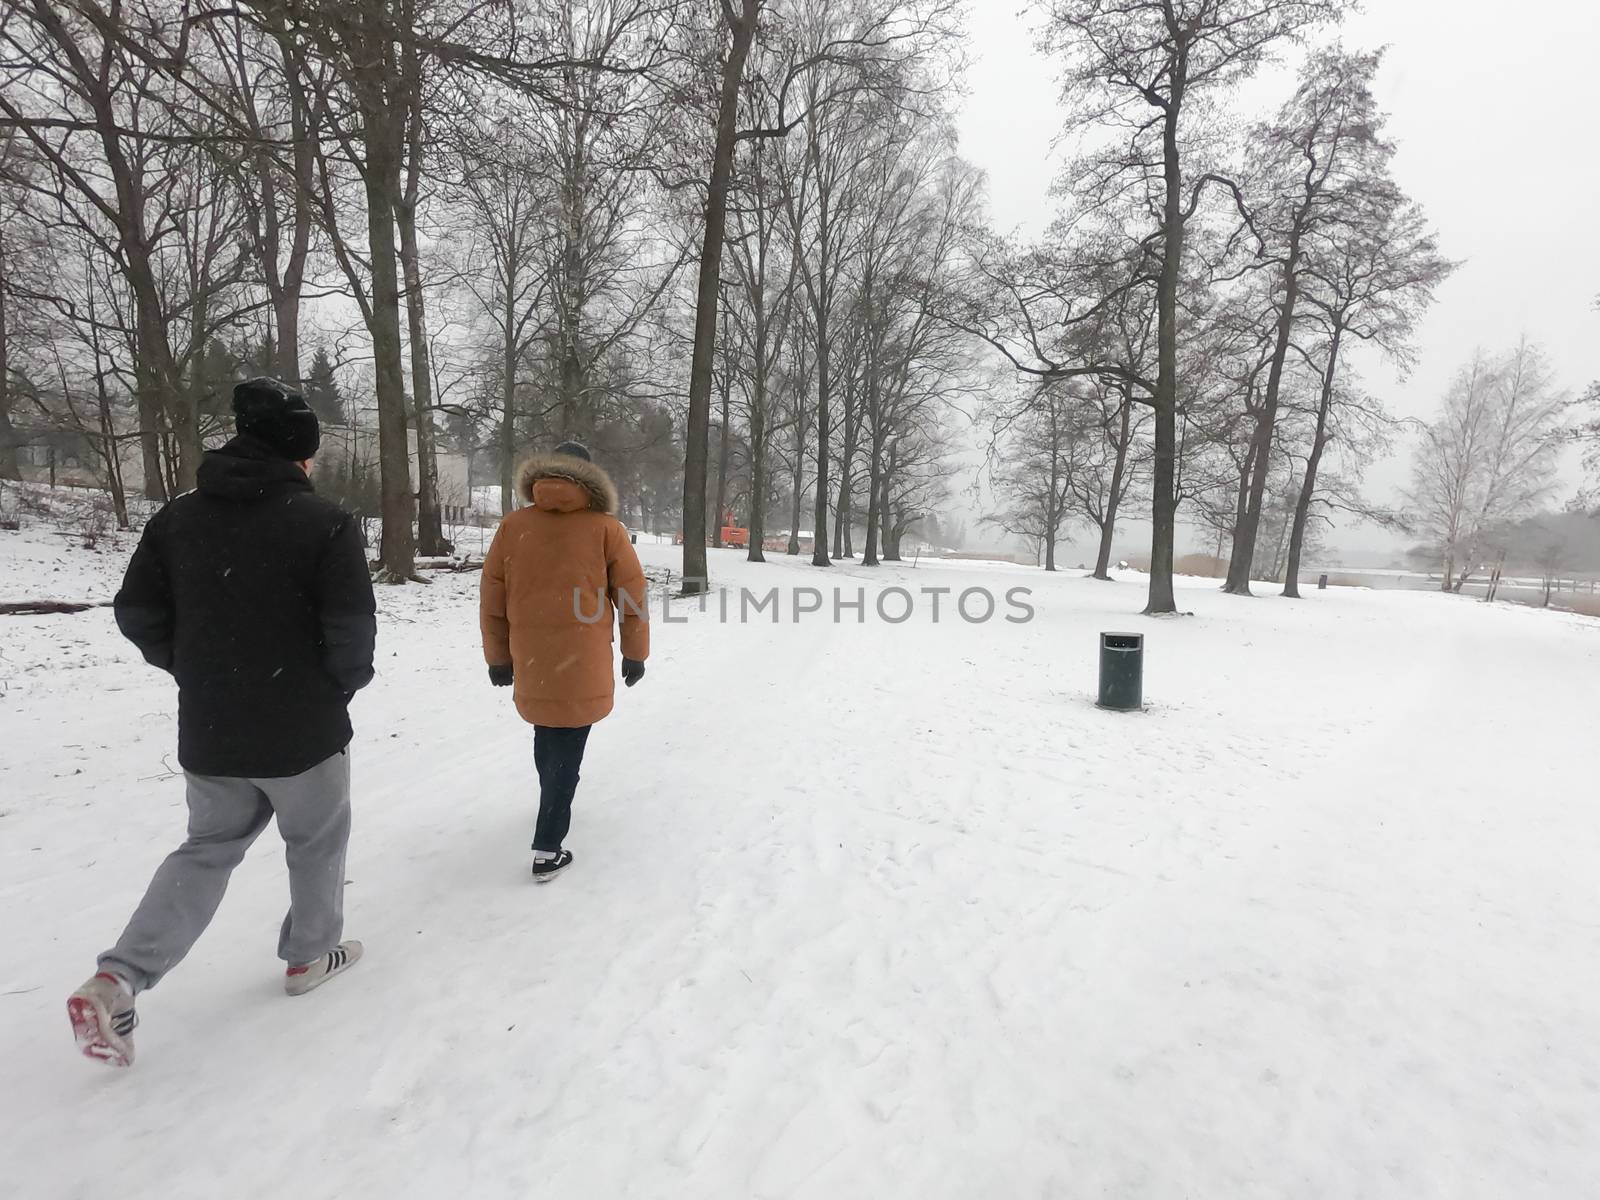 People have walked at a nature park during covid-19 pandemic soc by animagesdesign